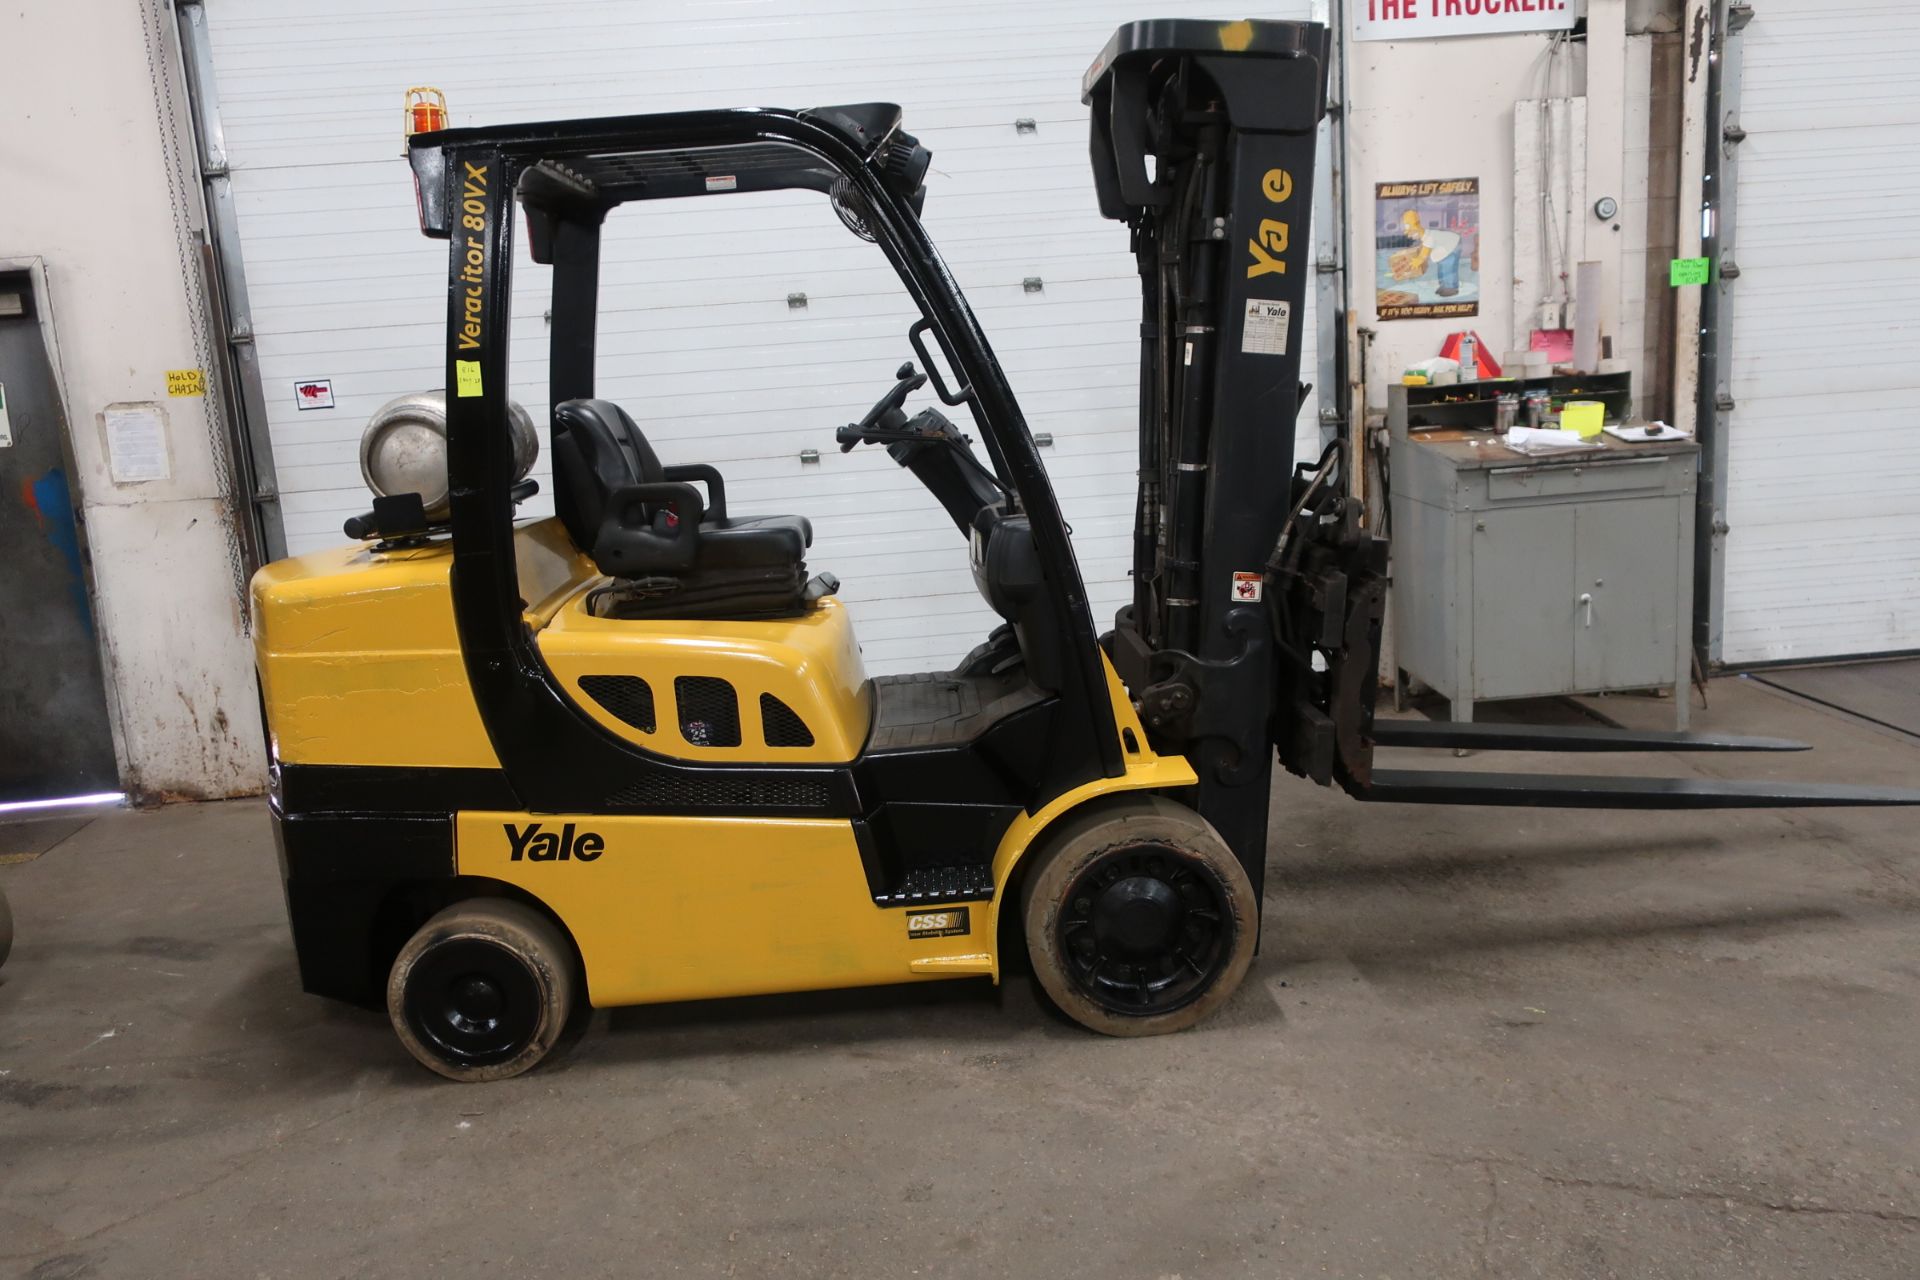 FREE CUSTOMS - 2019 Yale 8000lbs Capacity Forklift with 3-stage mast - LPG (propane) with